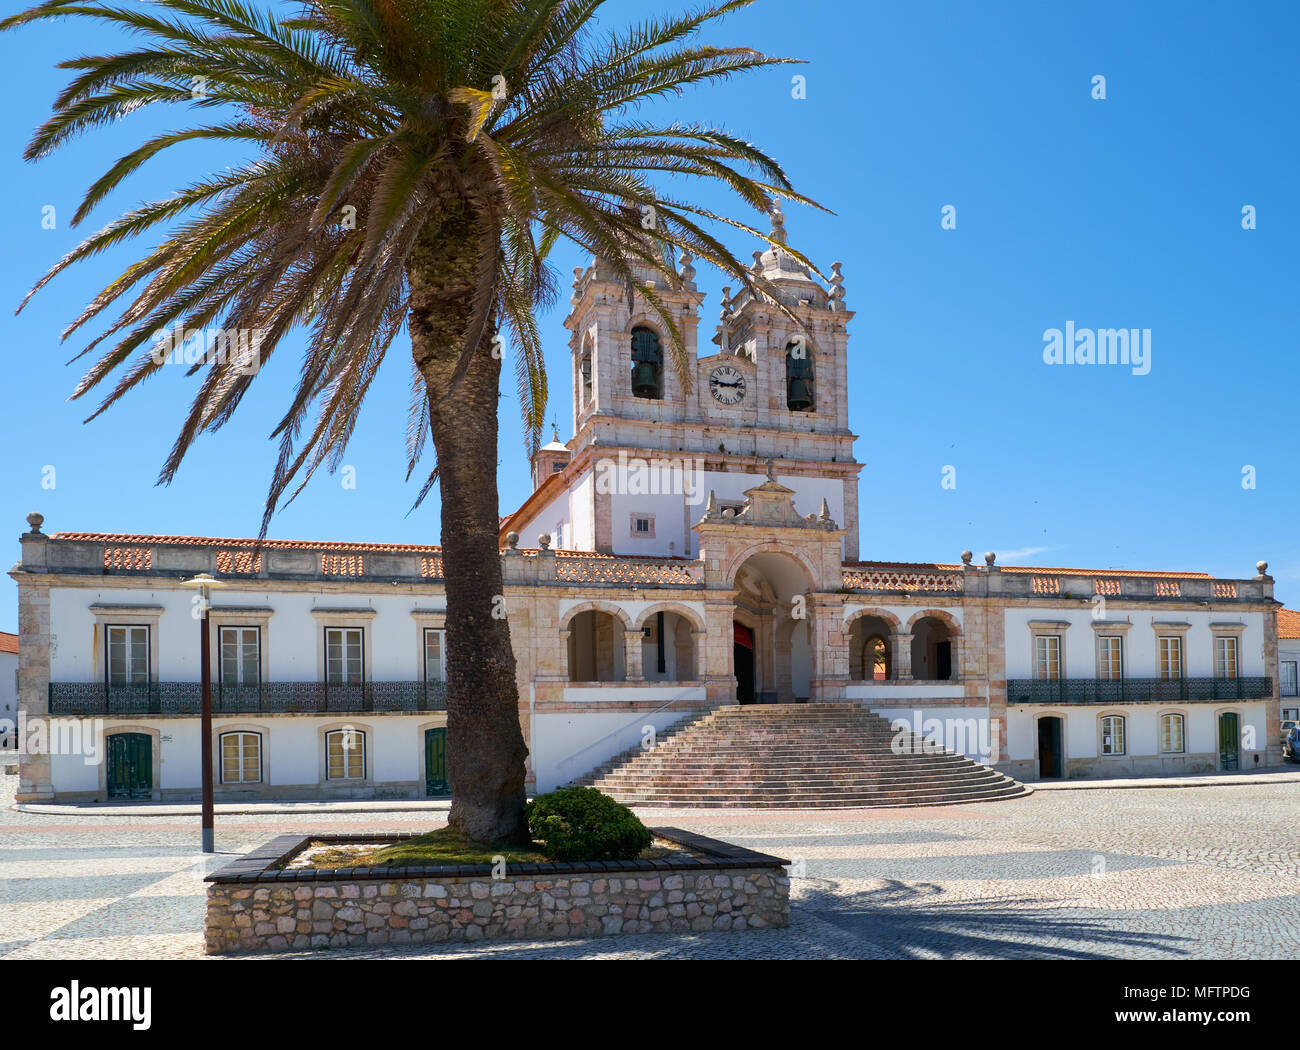 The view of the church of Nossa Senhora da Nazare throughout the central square with the big palm tree on the foreground. Nazare. Portugal Stock Photo